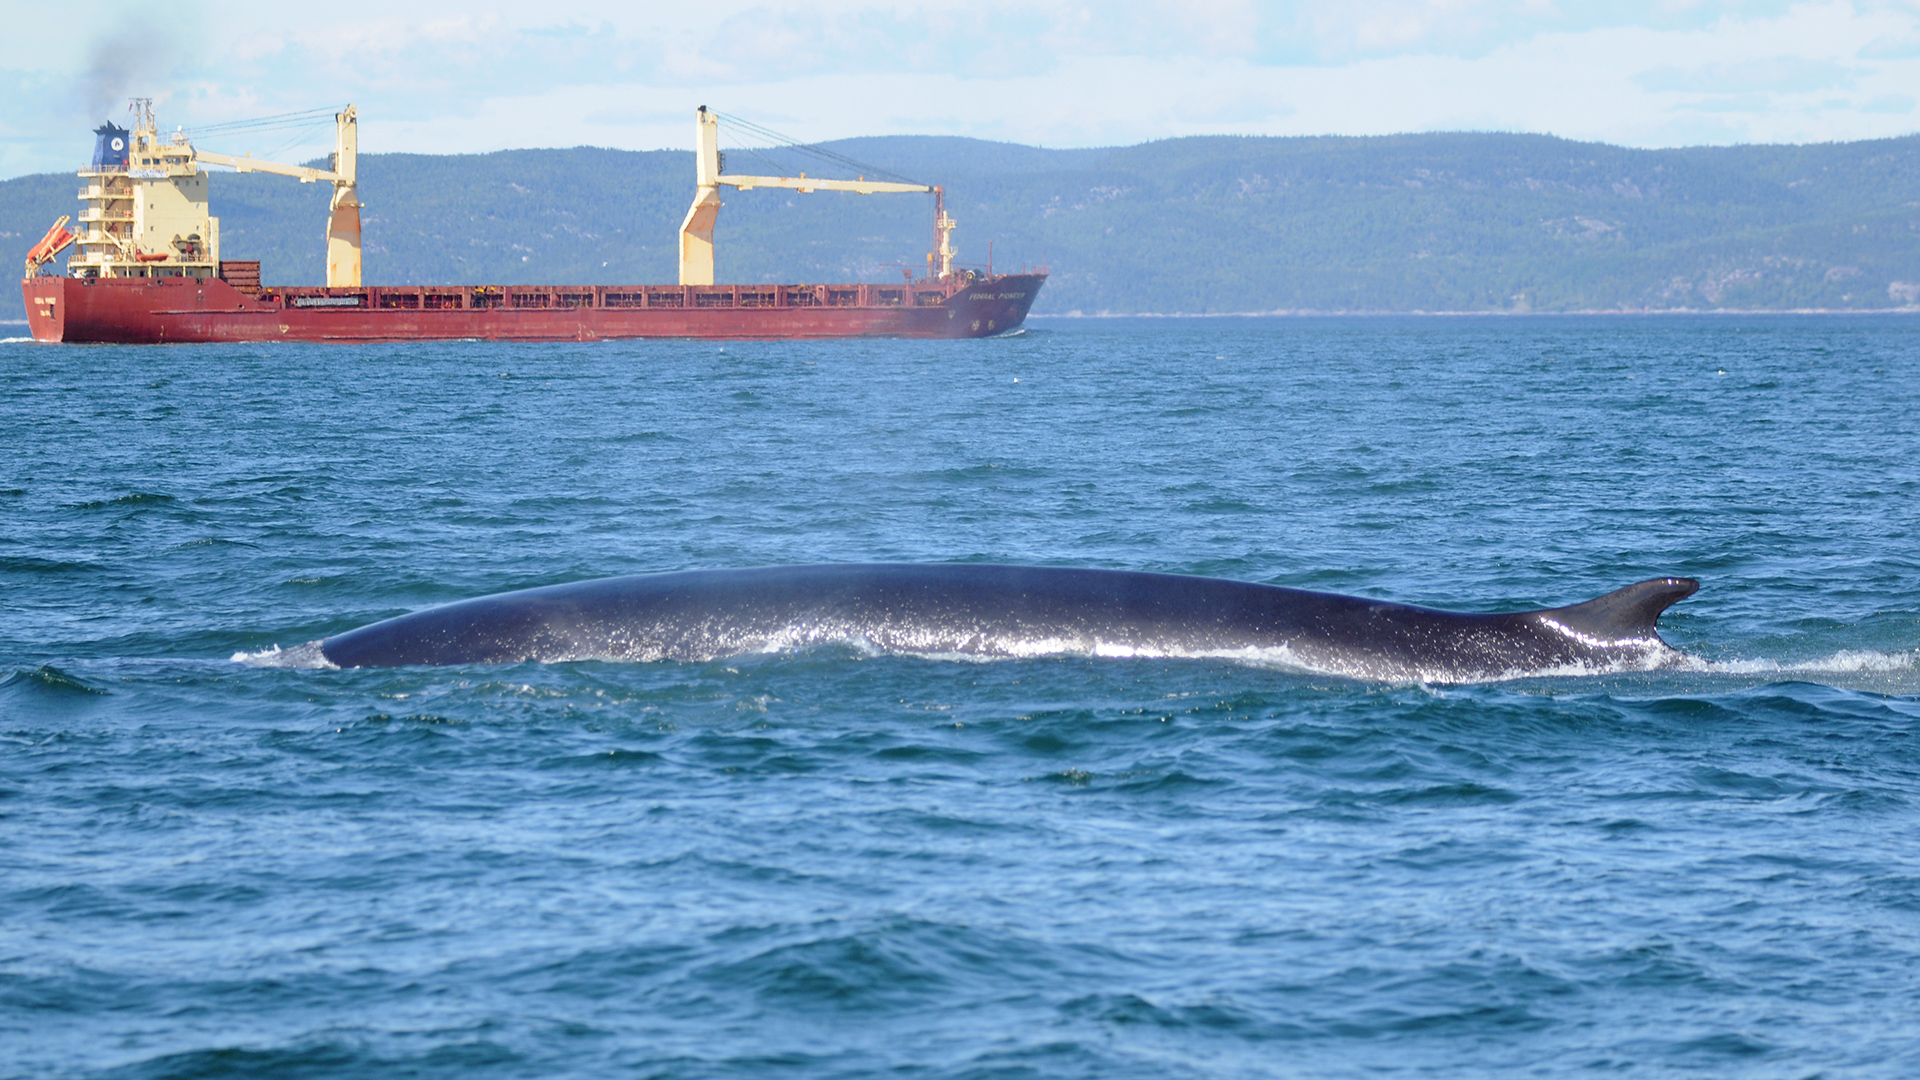 In the foreground, one can see the back of a surfacing fin whale. In the background, an ocean liner travels in the opposite direction.